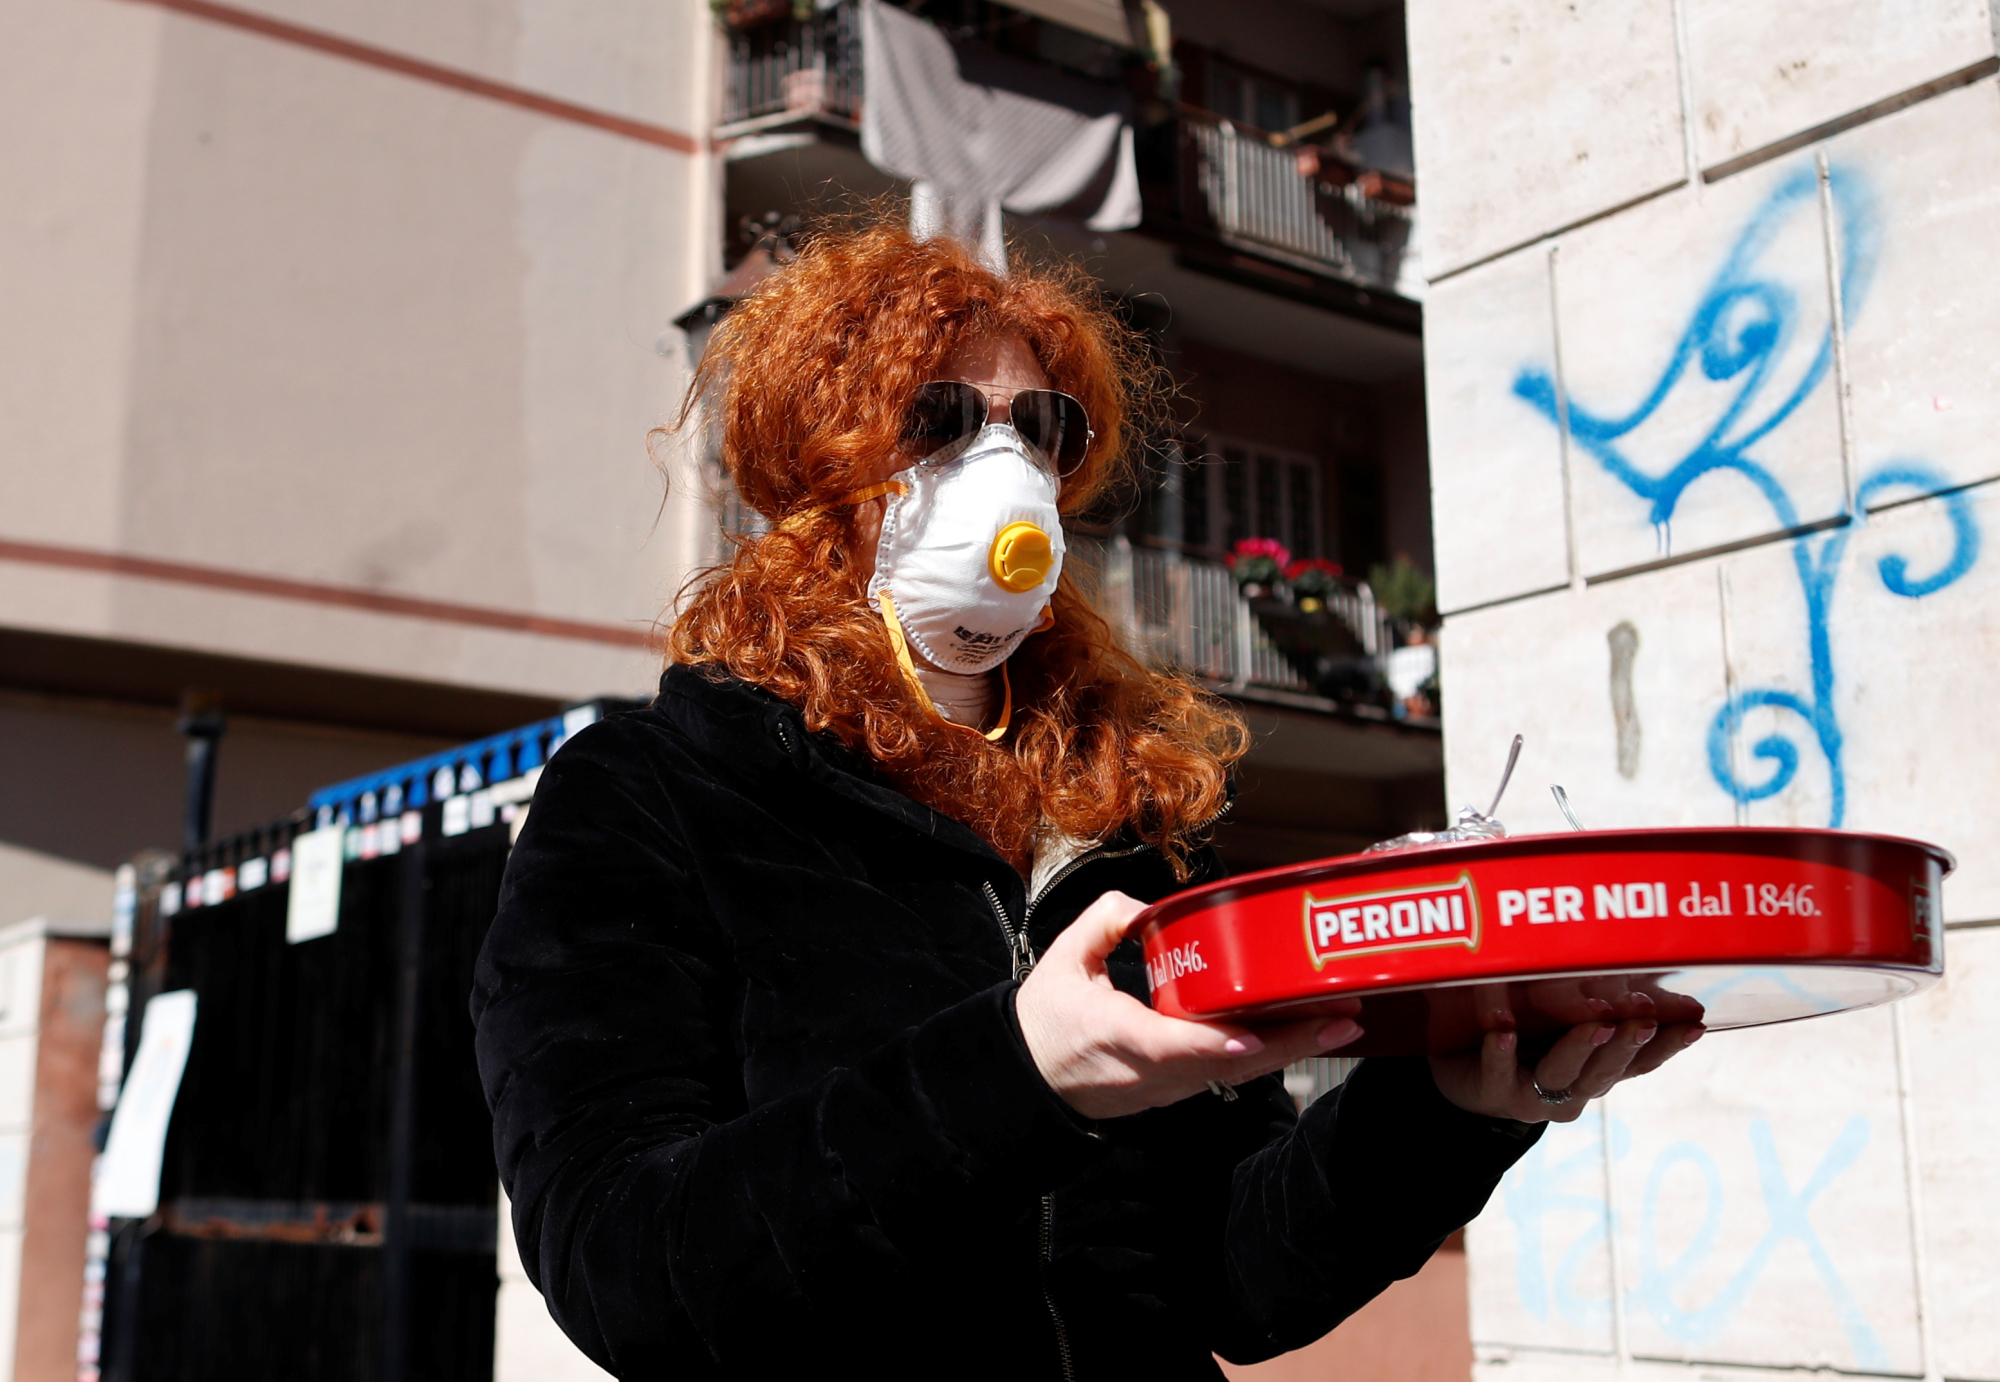 A woman  carries a tray in Rome on March 11, the second day of an unprecedented lockdown across the nation imposed to slow the outbreak of COVID-19. | REUTERS